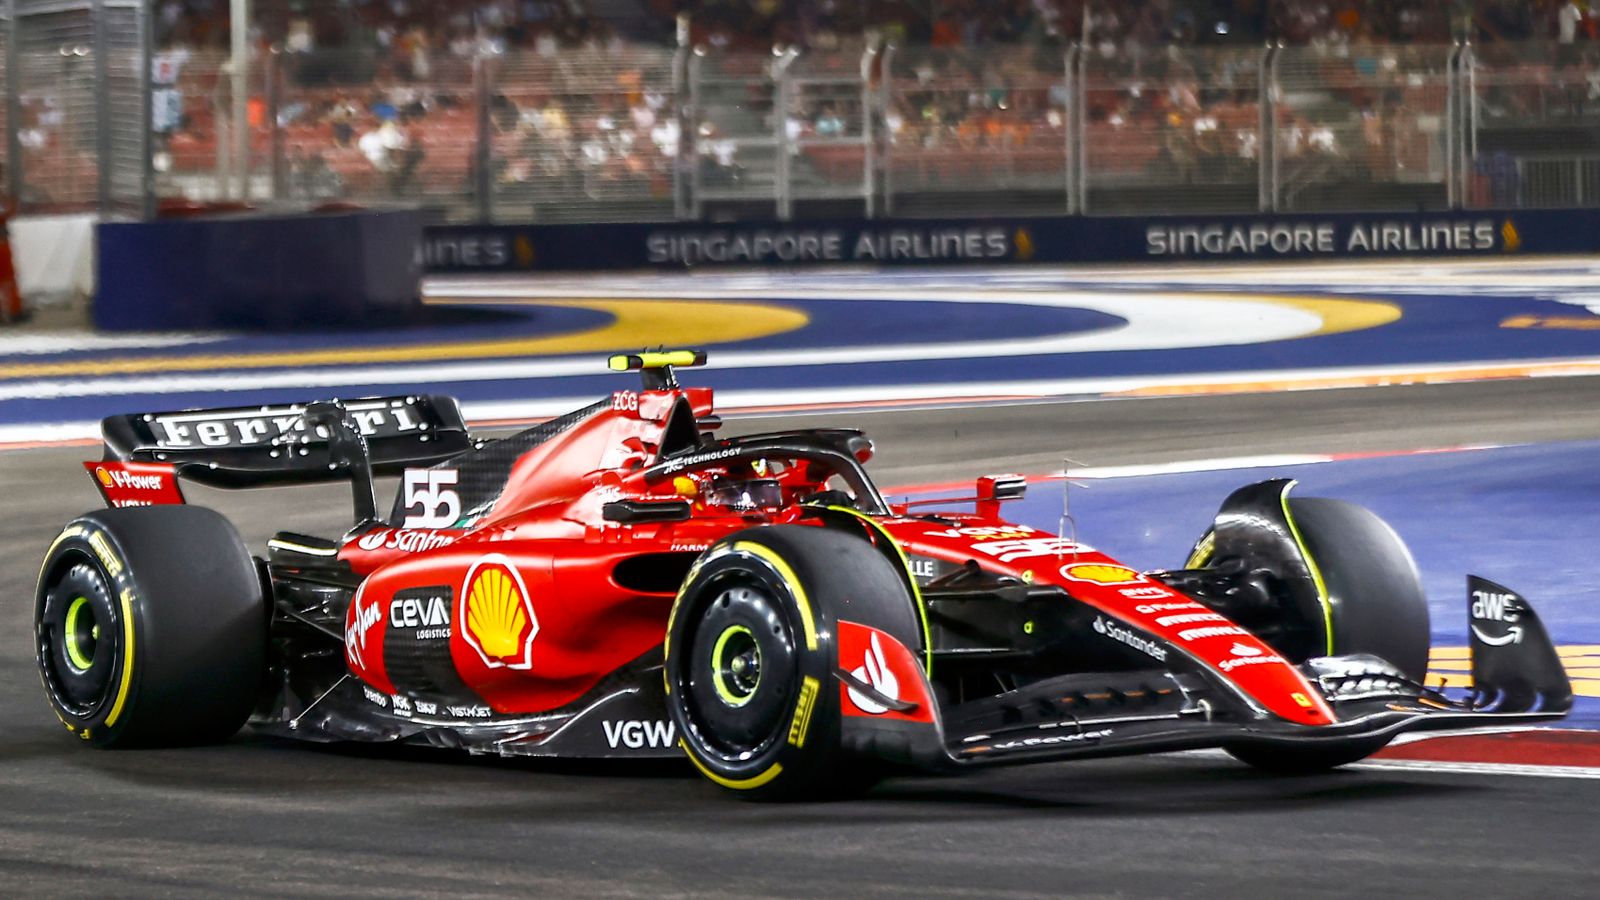 Singapore GP, Practice Two Carlos Sainz leads another Ferrari 1-2 while Red Bull off the pace F1 News